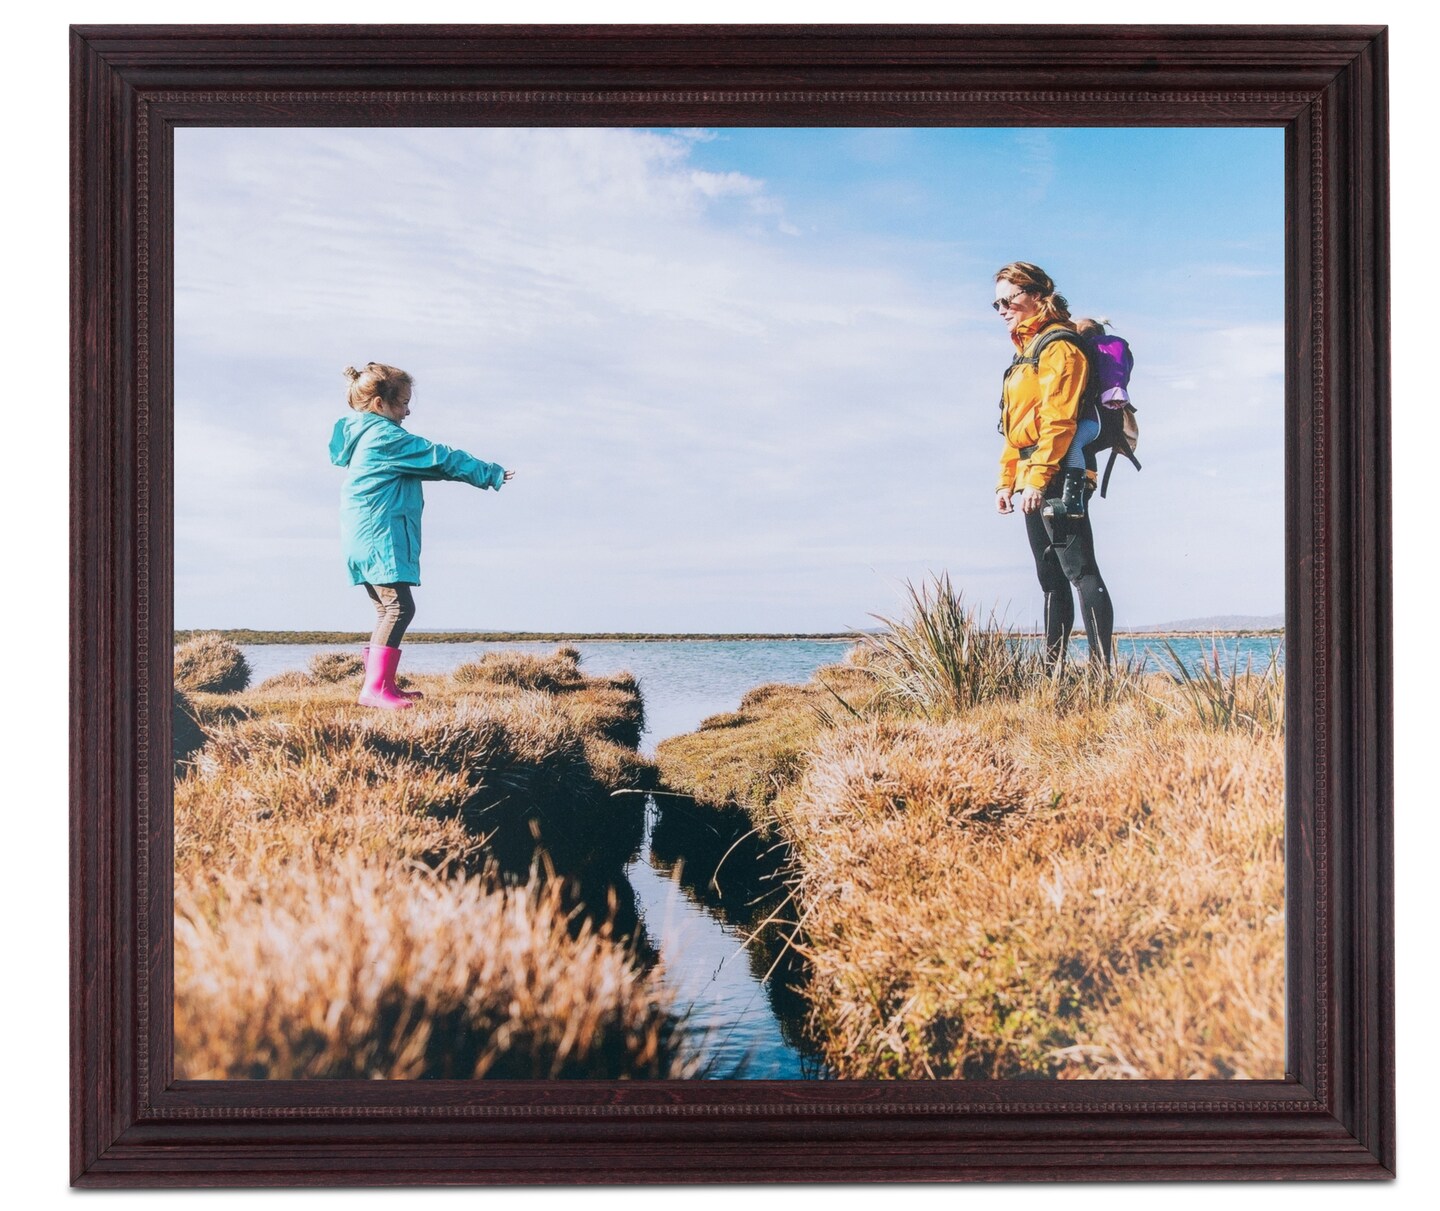 ArtToFrames 16x24 Inch Picture Frame, This 1.25 Inch Custom Wood Poster  Frame is Available in Multiple Colors, Great for Your Art or Photos - Comes  with Regular Acrylic and Foam Backing 3/16